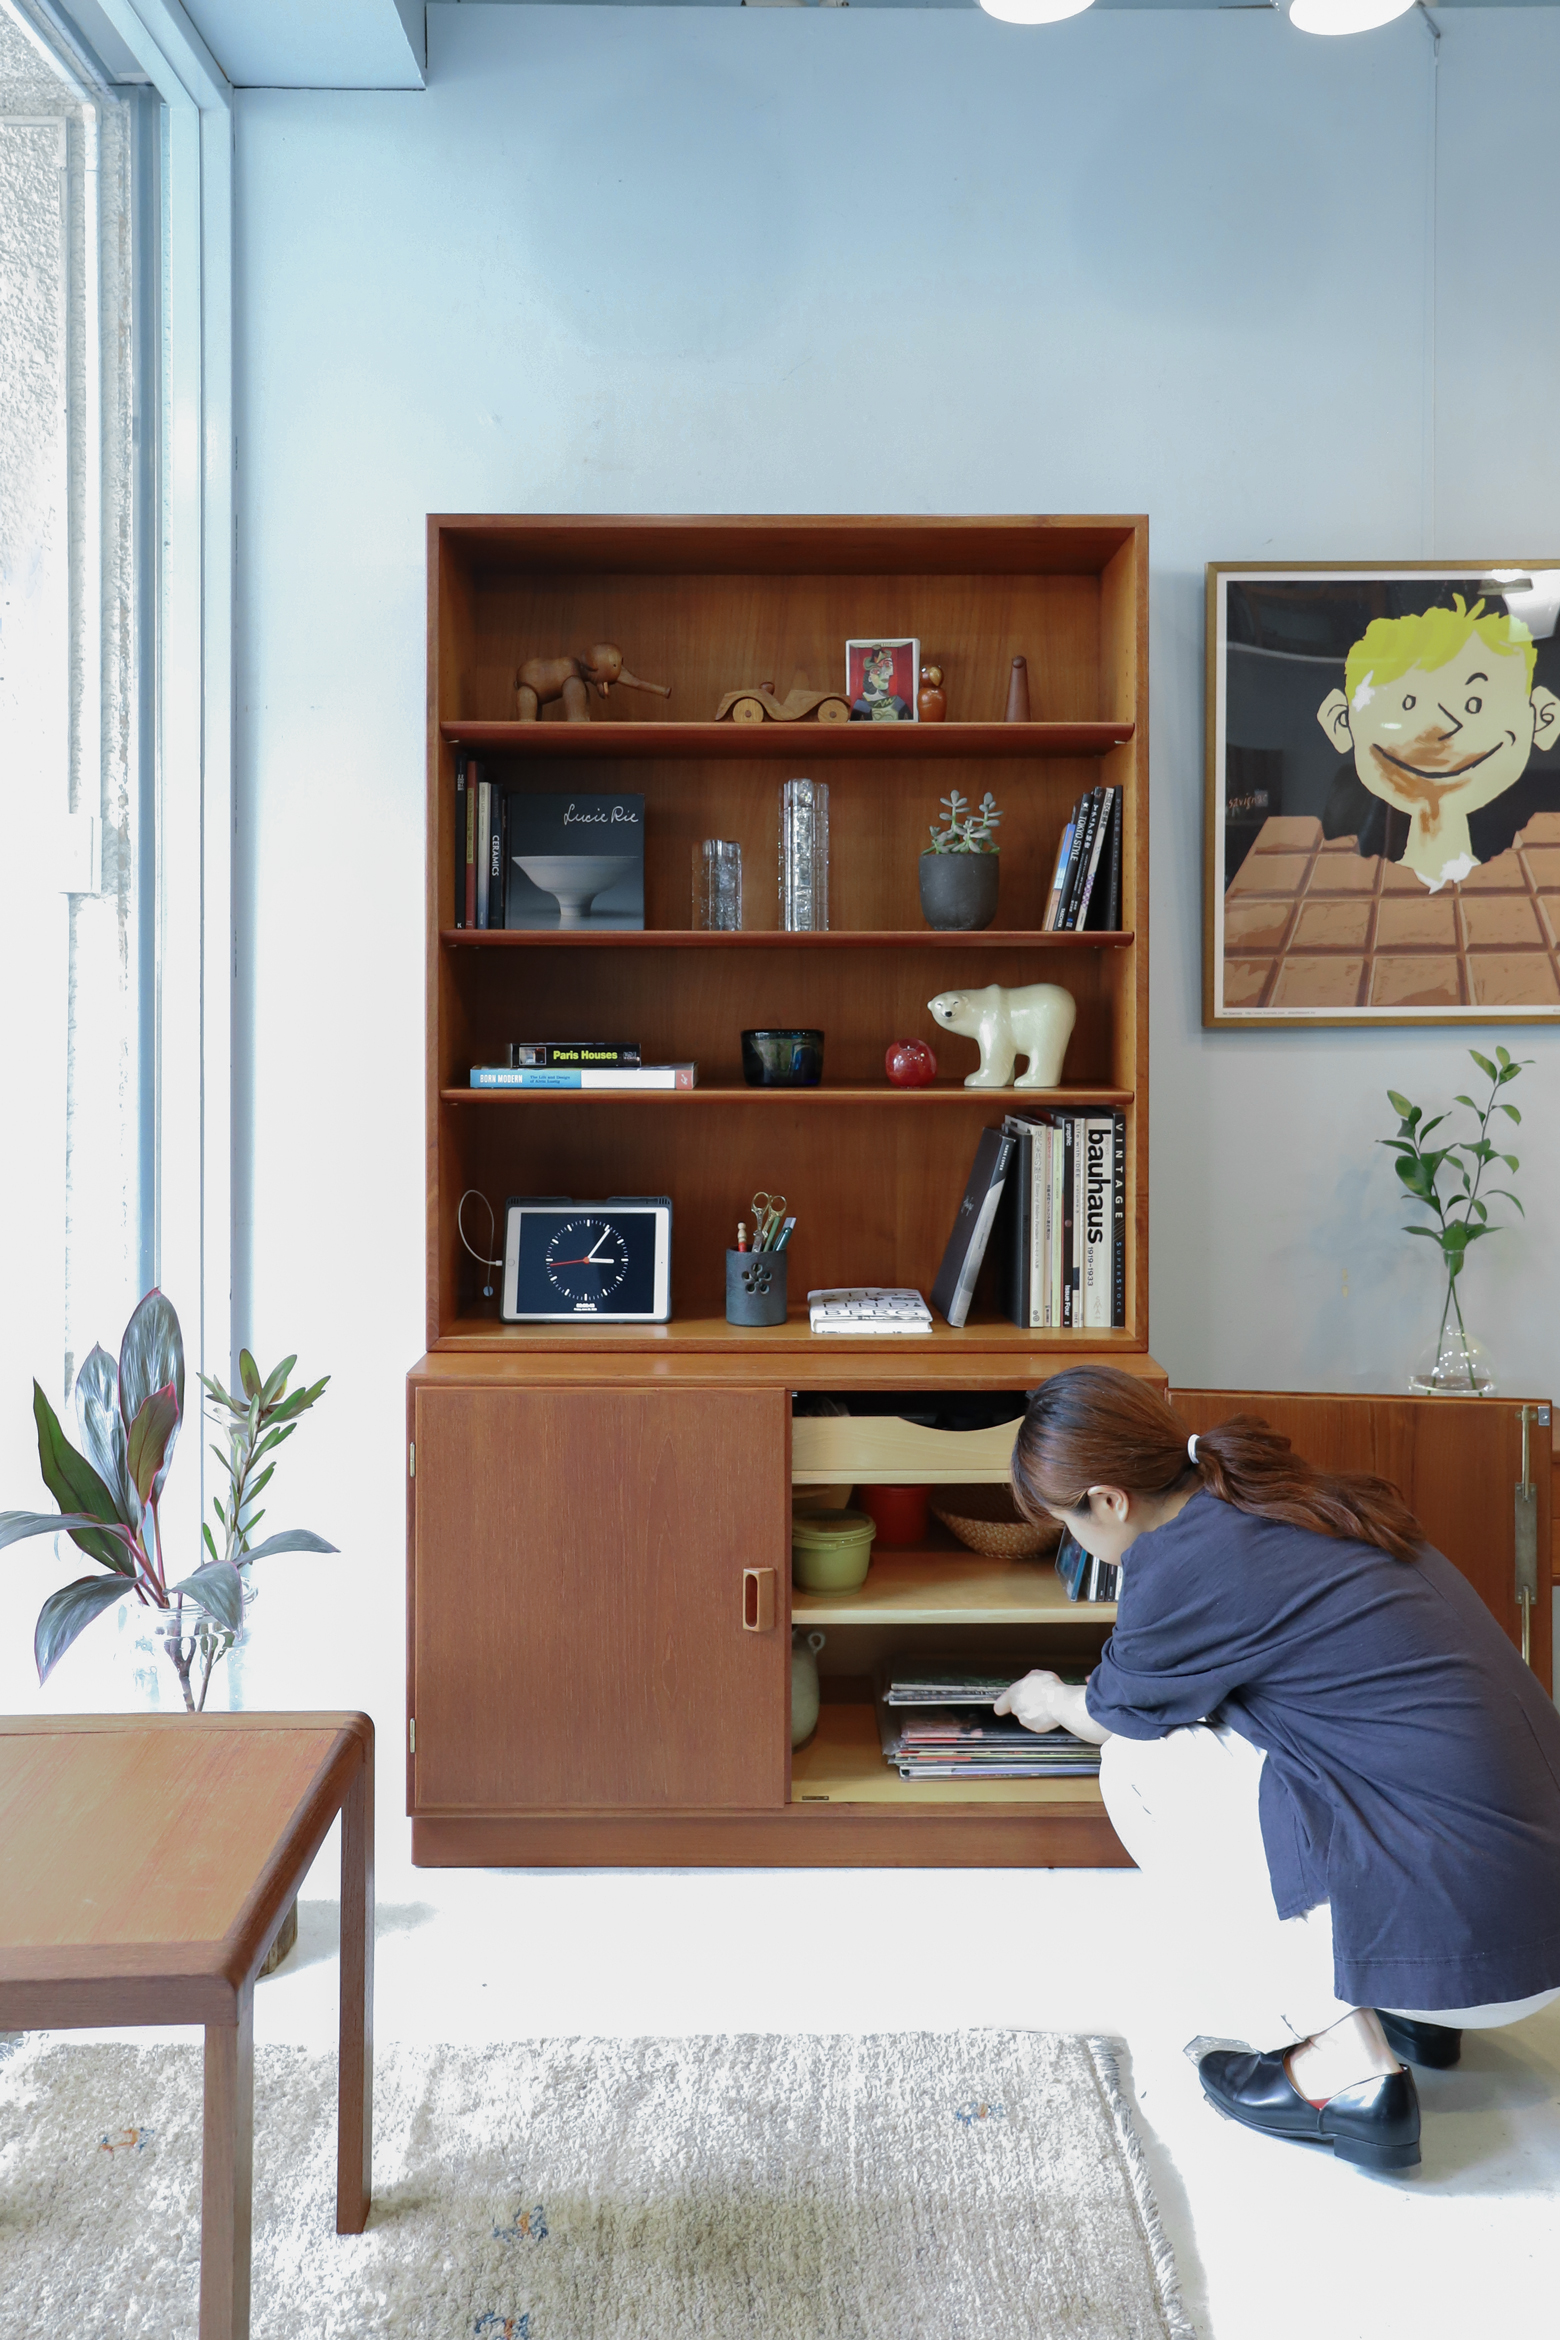 Børge Mogensen Book Case Cabinet Søborg Møbler/ボーエ・モーエンセン ブックケース キャビネット ソボーモブラー デンマーク 北欧ヴィンテージ 収納家具